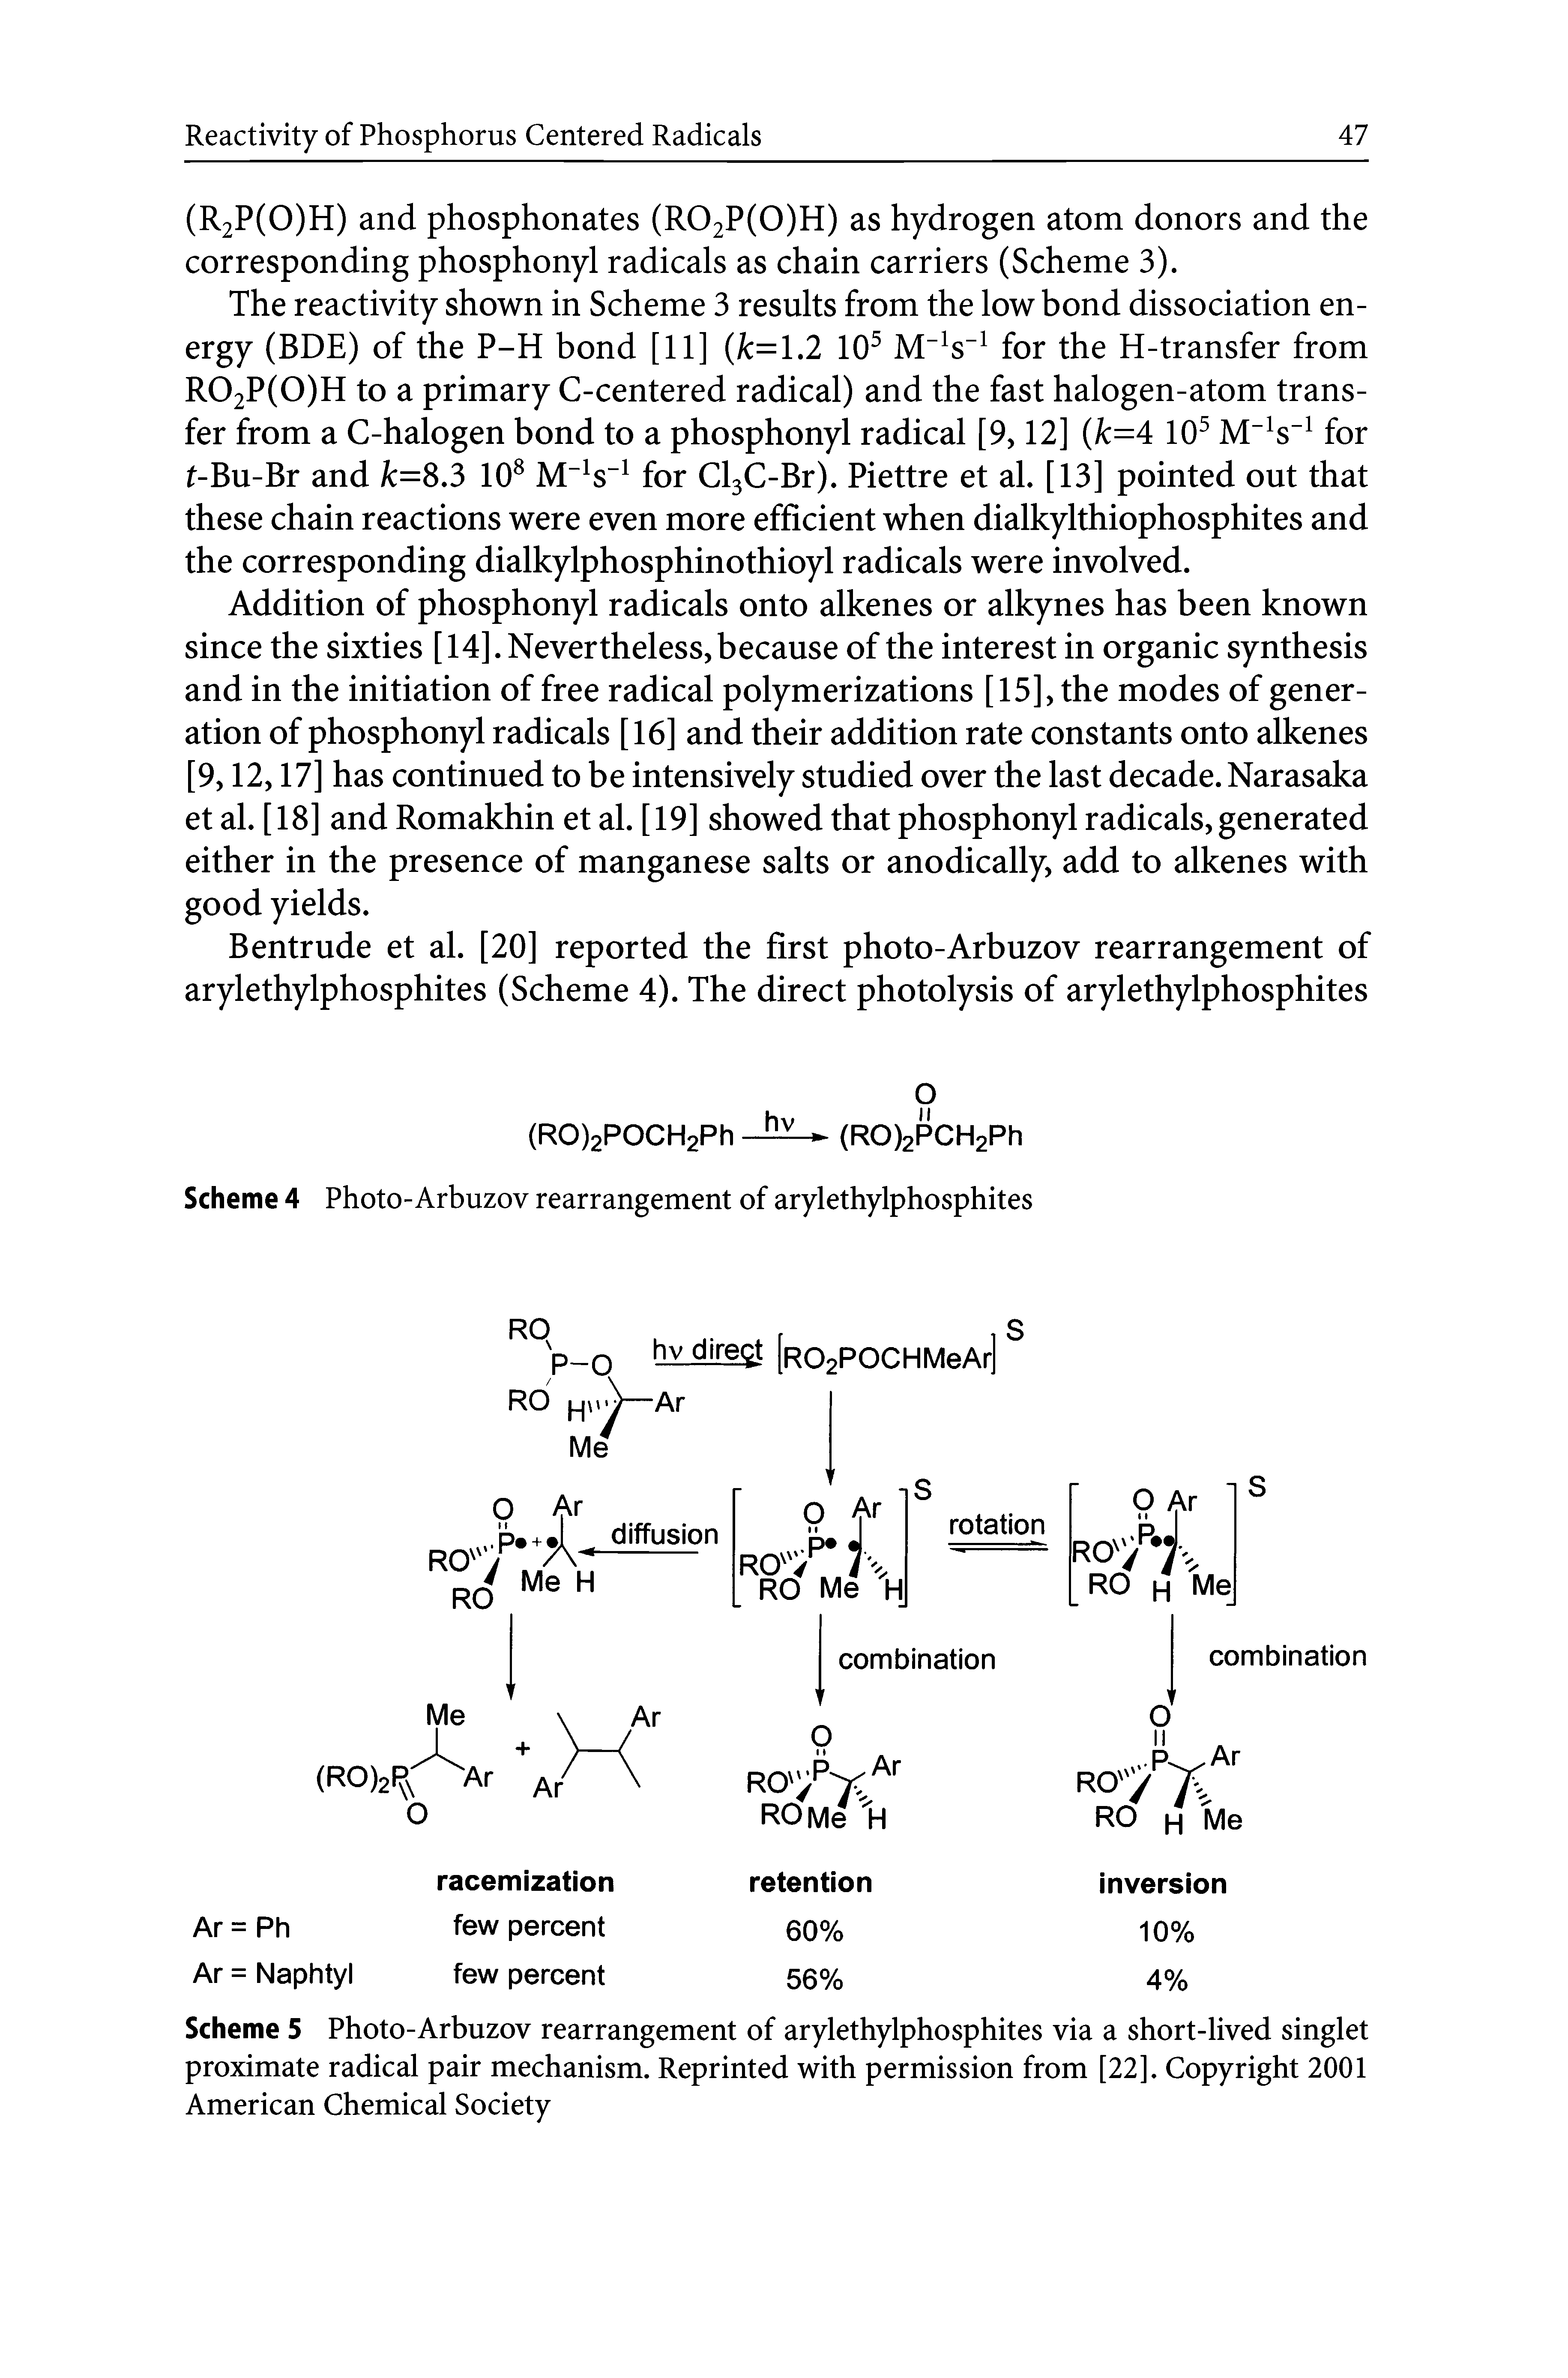 Scheme 5 Photo-Arbuzov rearrangement of arylethylphosphites via a short-lived singlet proximate radical pair mechanism. Reprinted with permission from [22]. Copyright 2001 American Chemical Society...